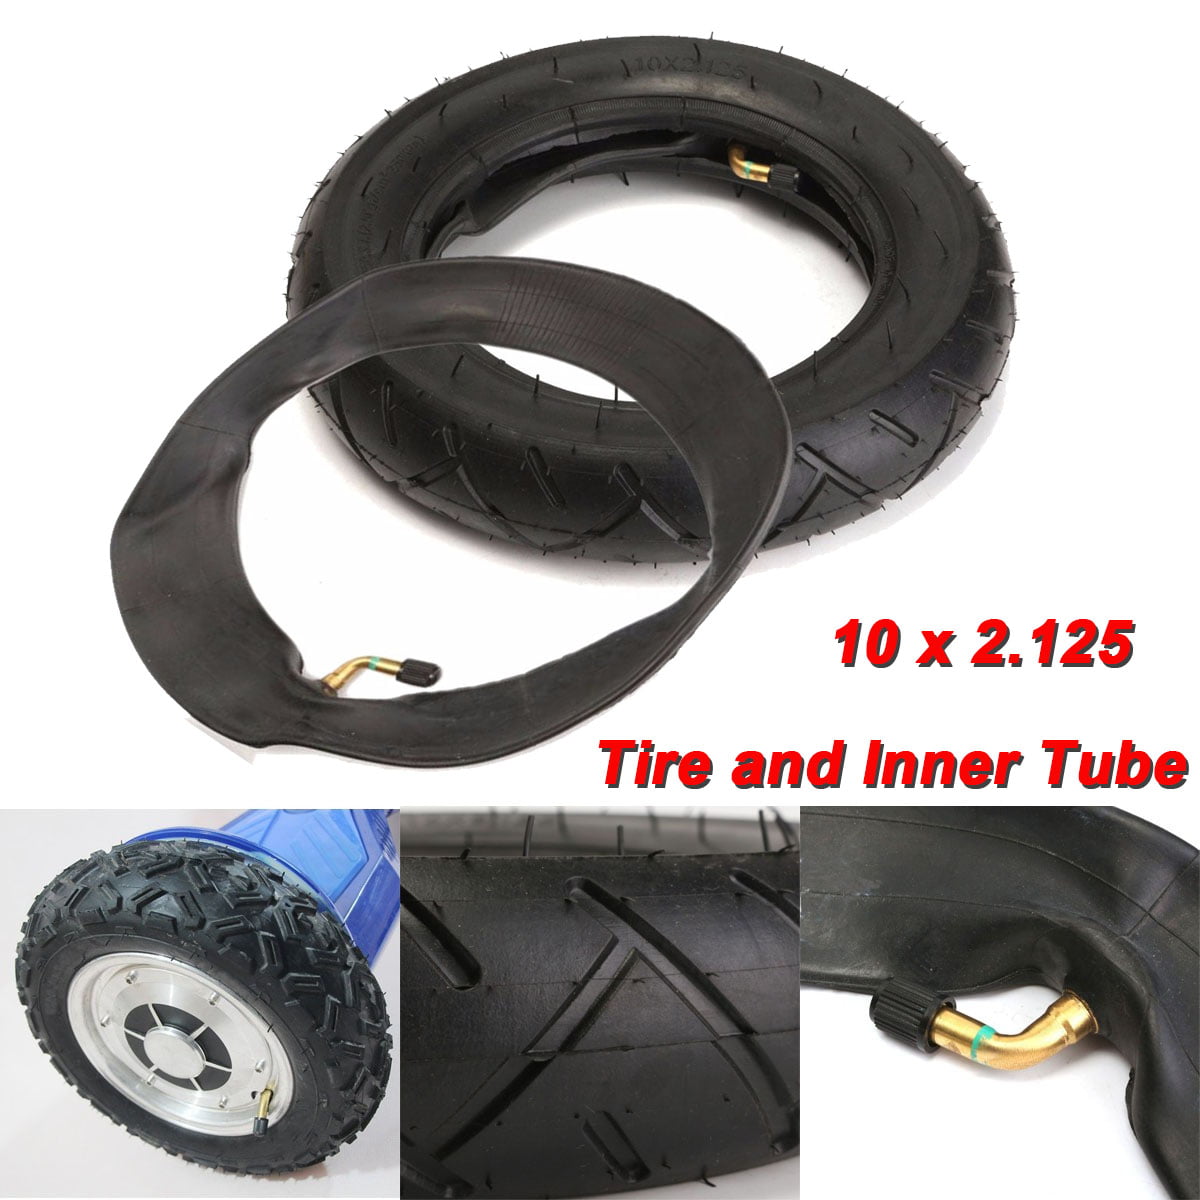 10 x 2 inner tube for hoverboard Tires self balancing 2-wheel scooter- 2 pack 